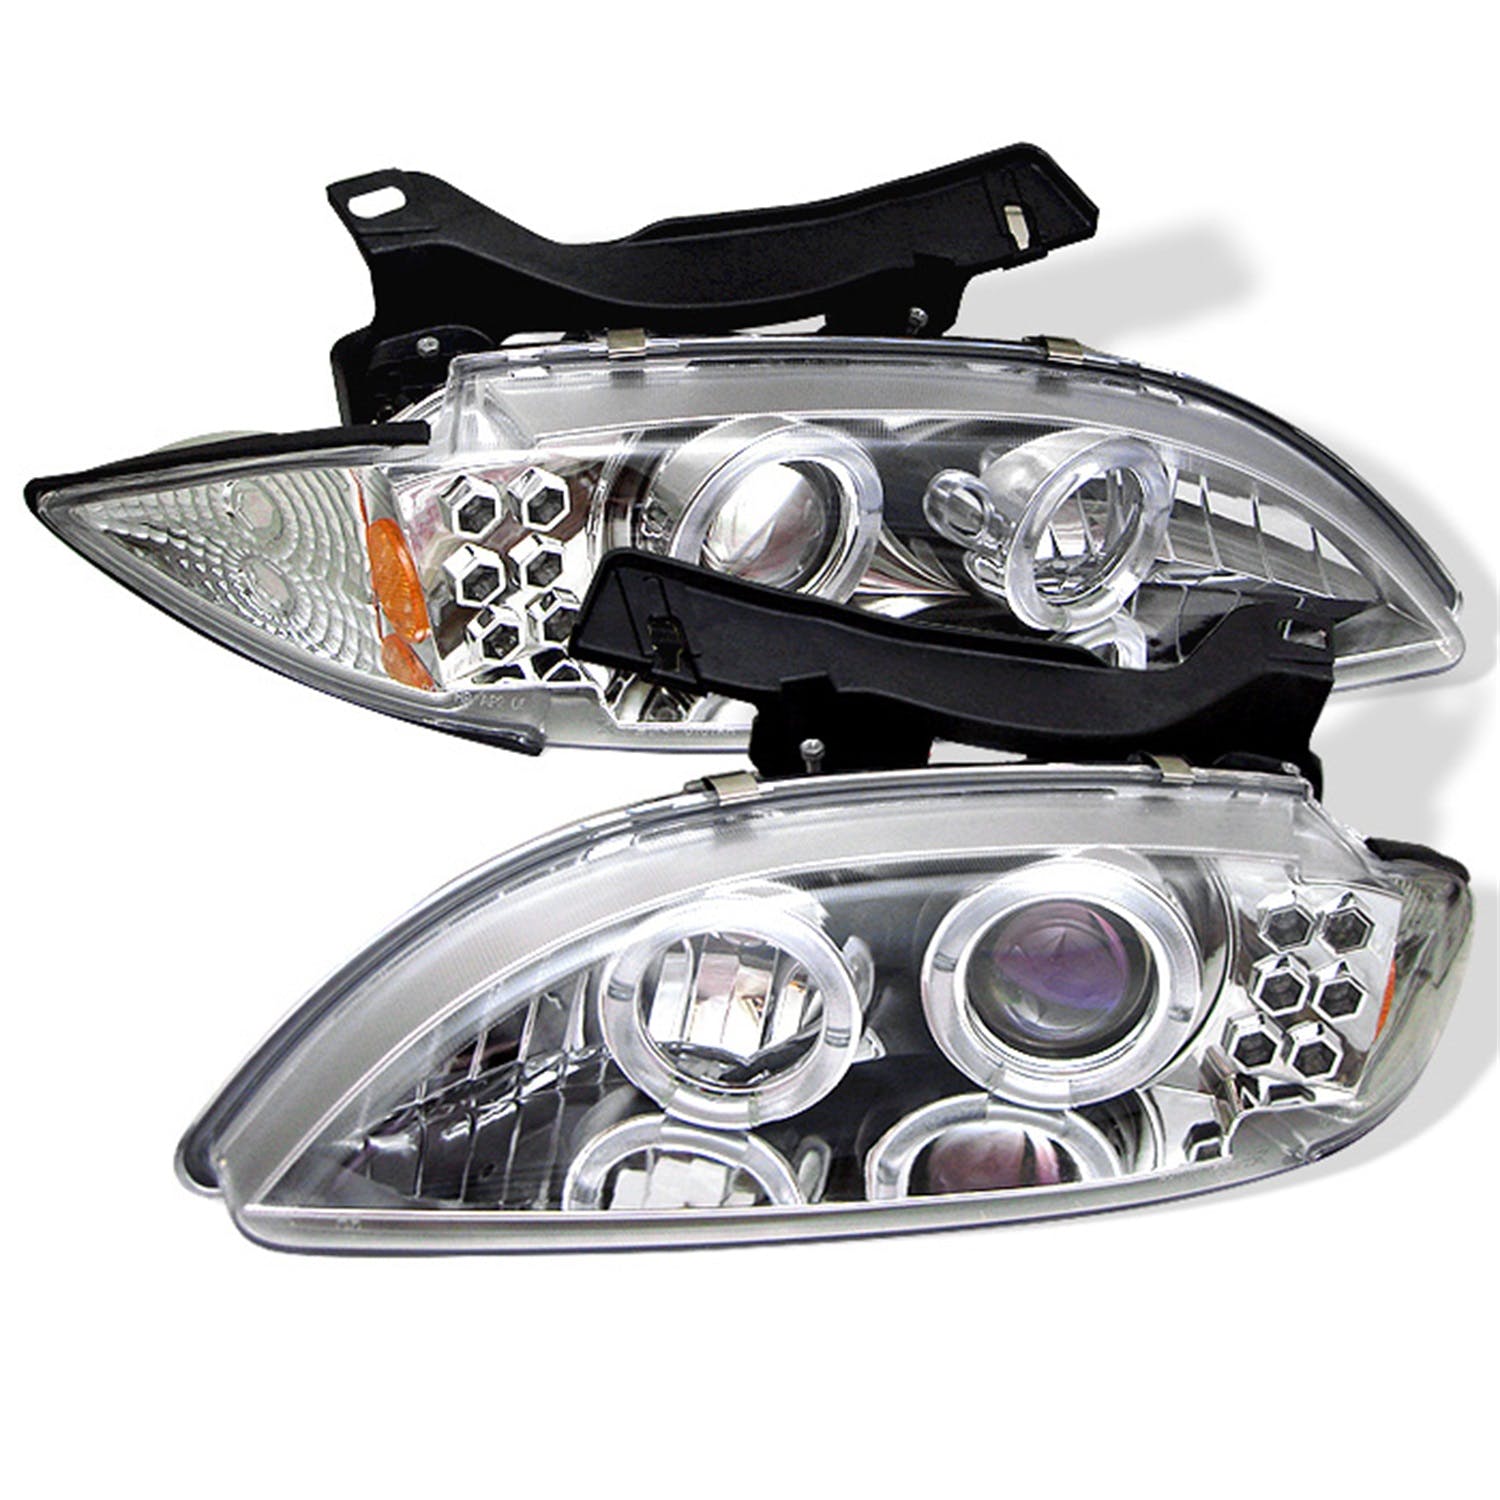 Spyder Auto 5009272 ( SPYDER ) CHEVY CAVALIER 95-99 PROJECTOR HEADLIGHTS-LED HALO-REPLACEANLE LEDS-C